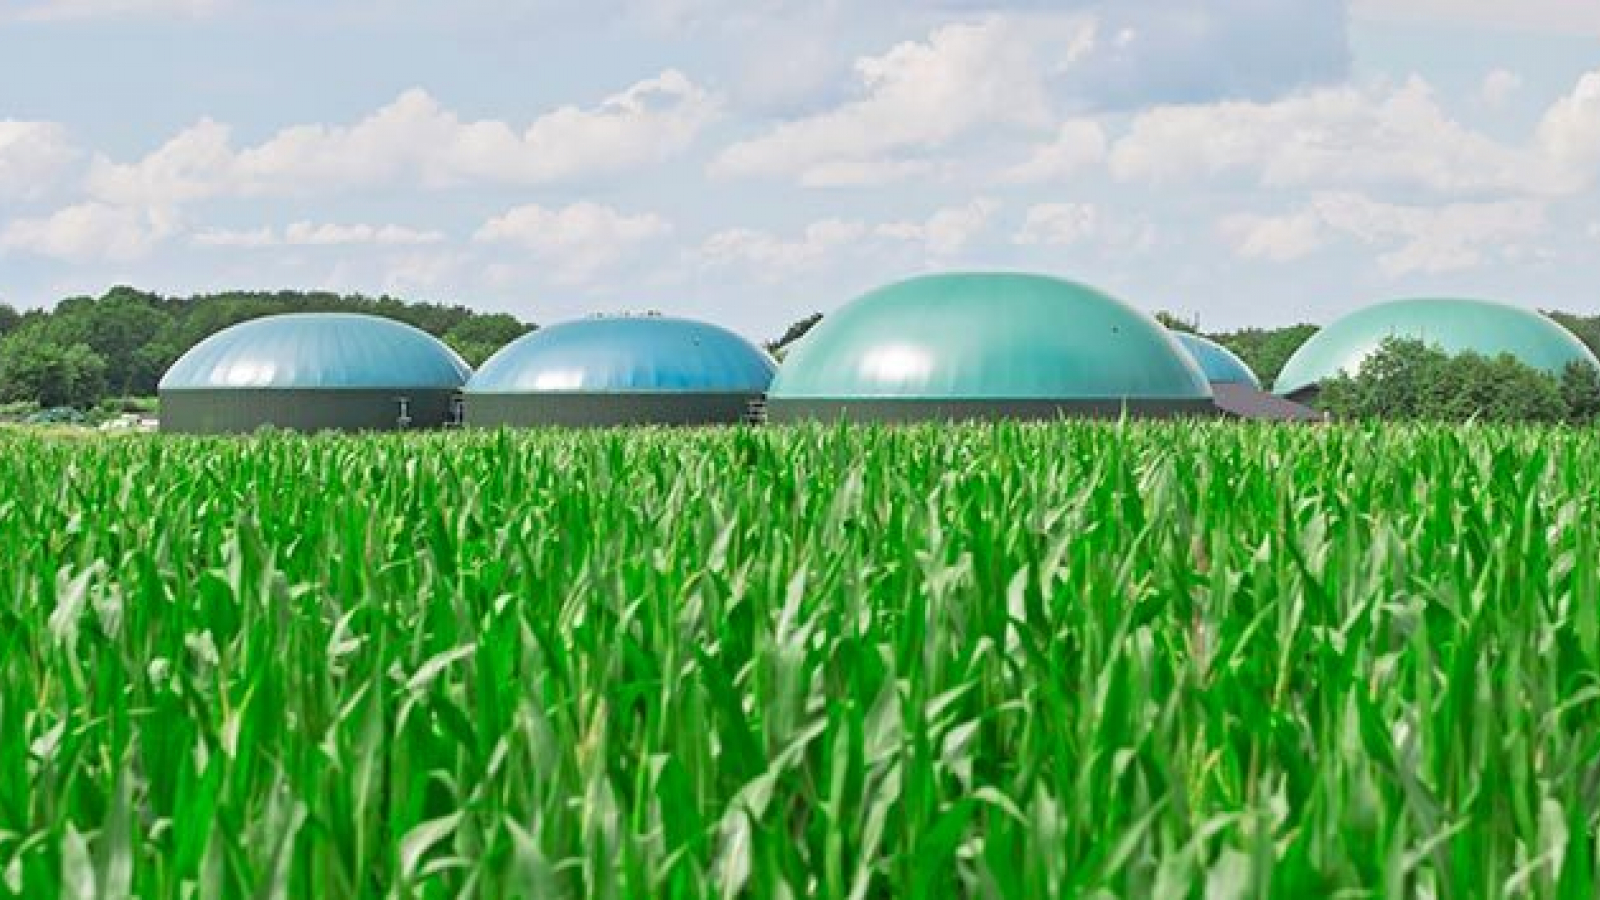 New biogas plant to be built in Ukraine